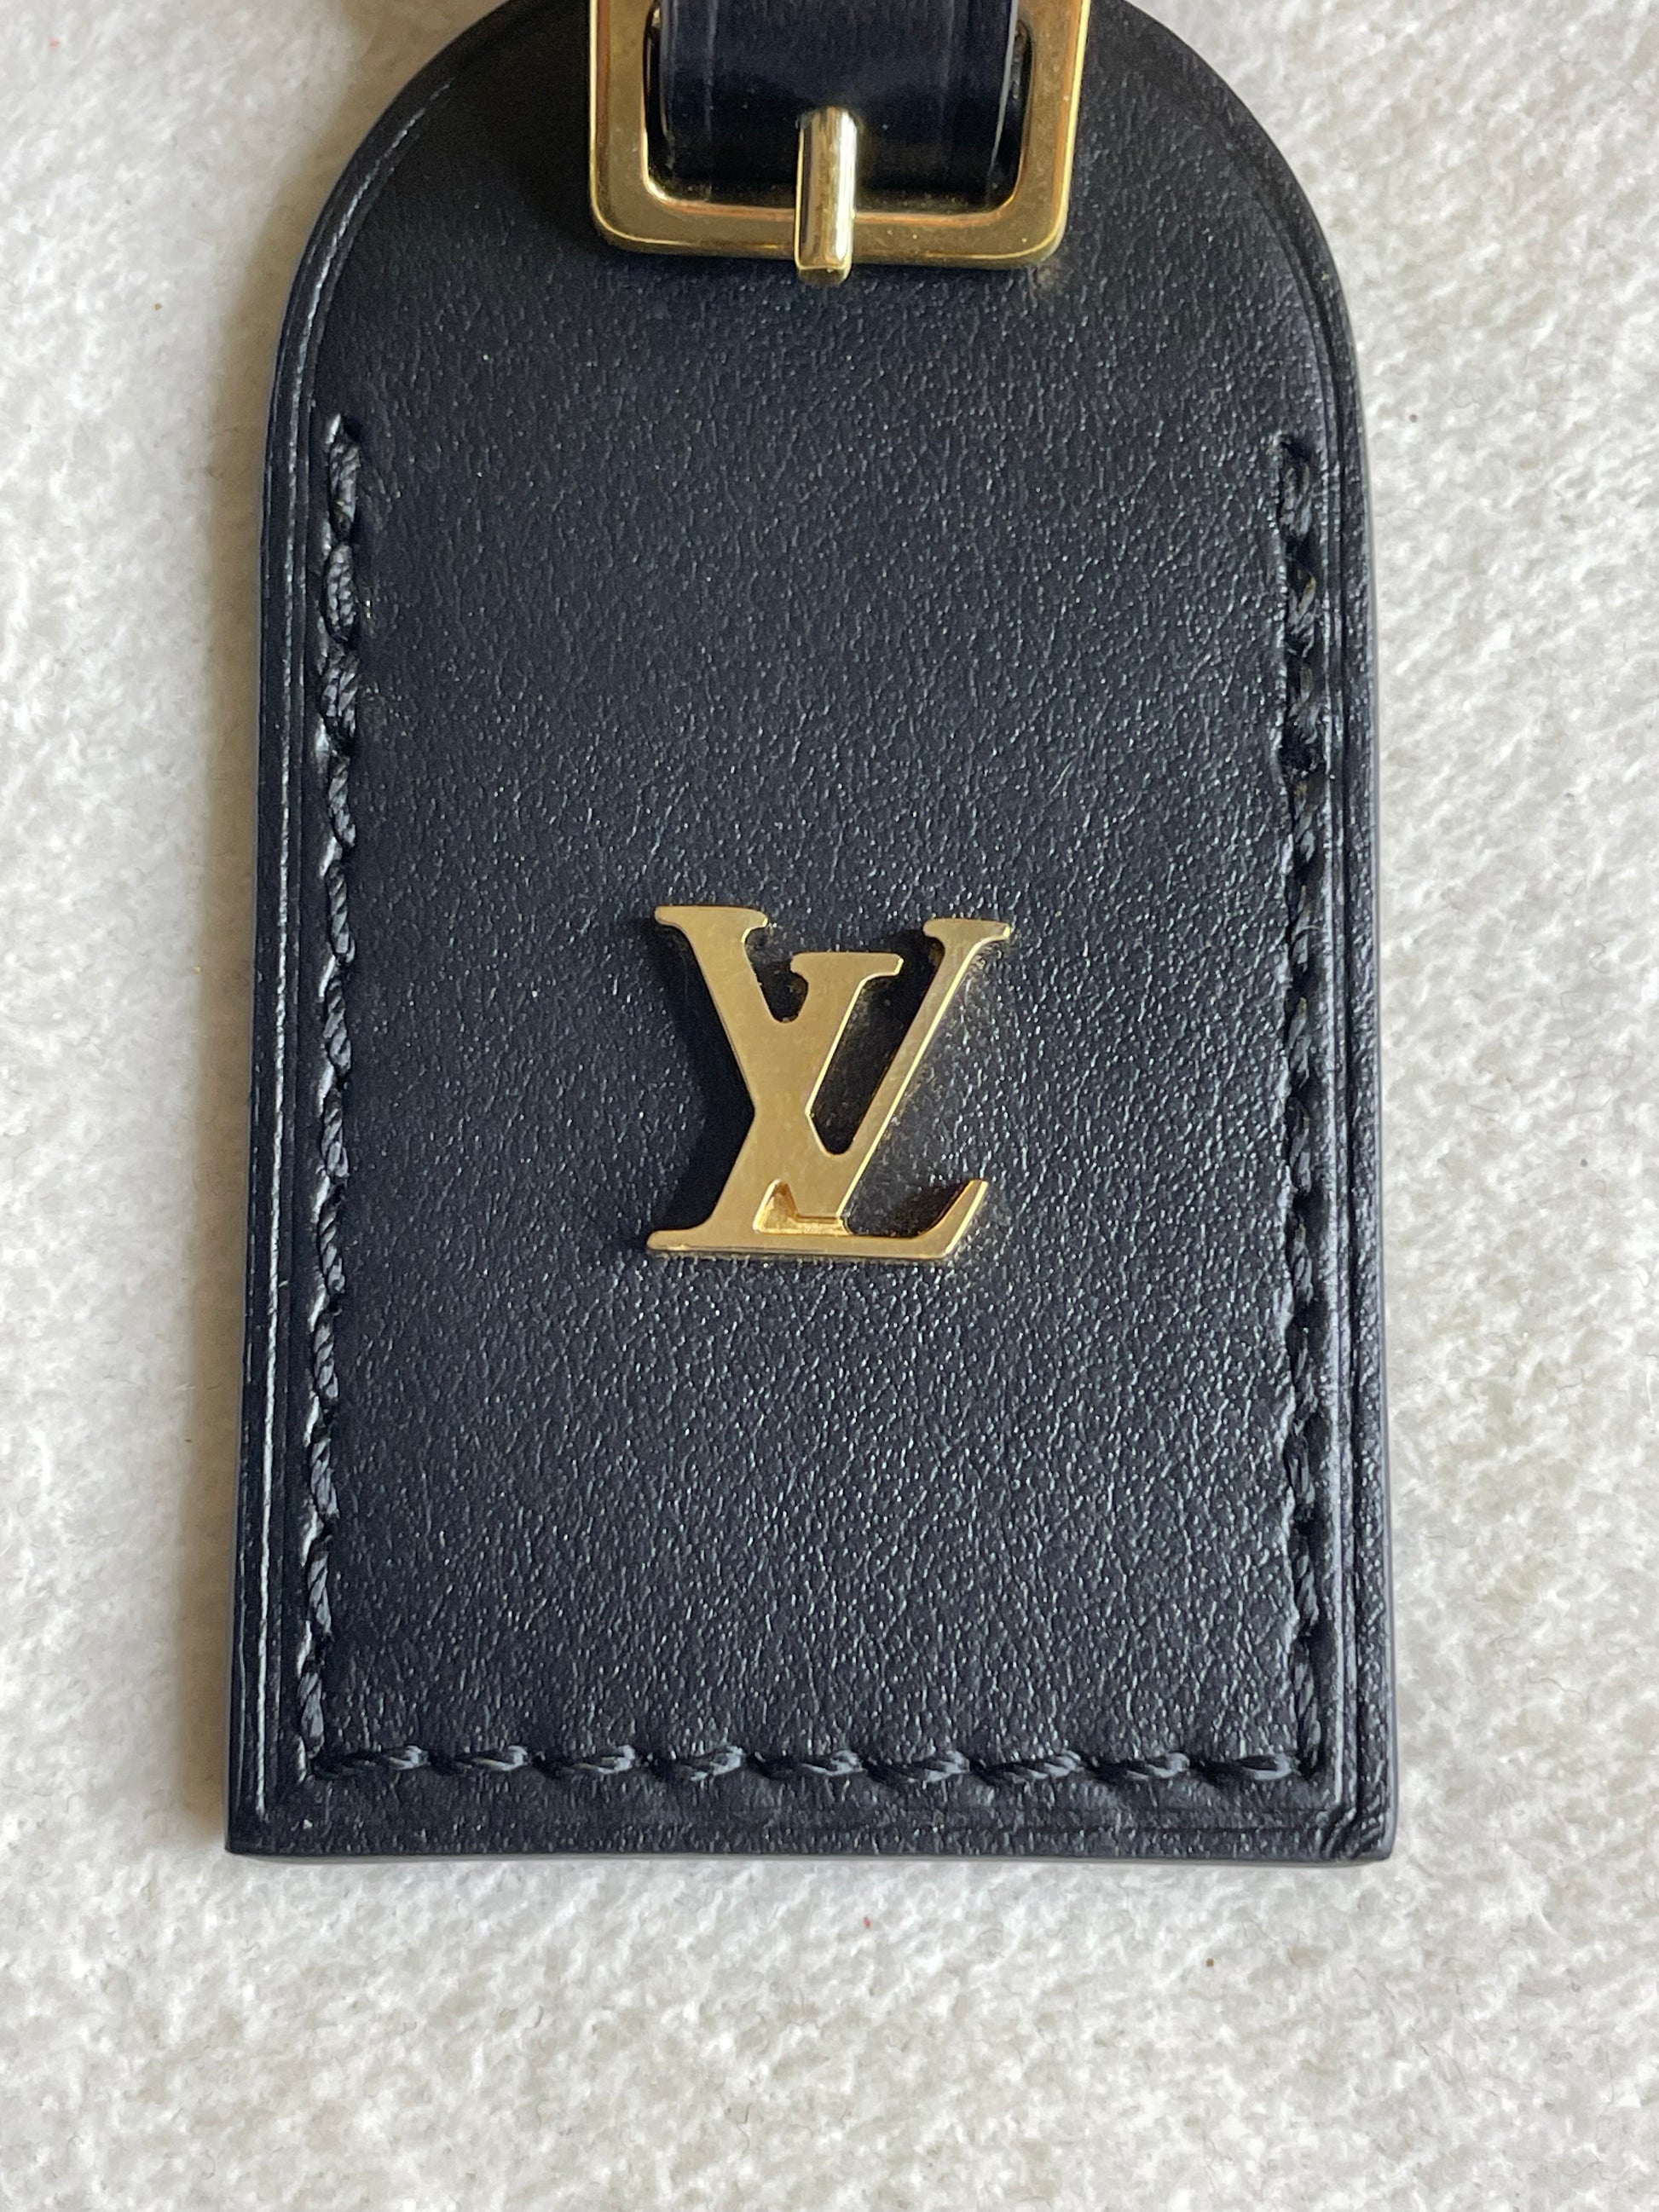 Louis Vuitton Luggage Tag (size large, color ebene) with my initials  Louis  vuitton luggage tag, Louis vuitton handbags, Louis vuitton bag